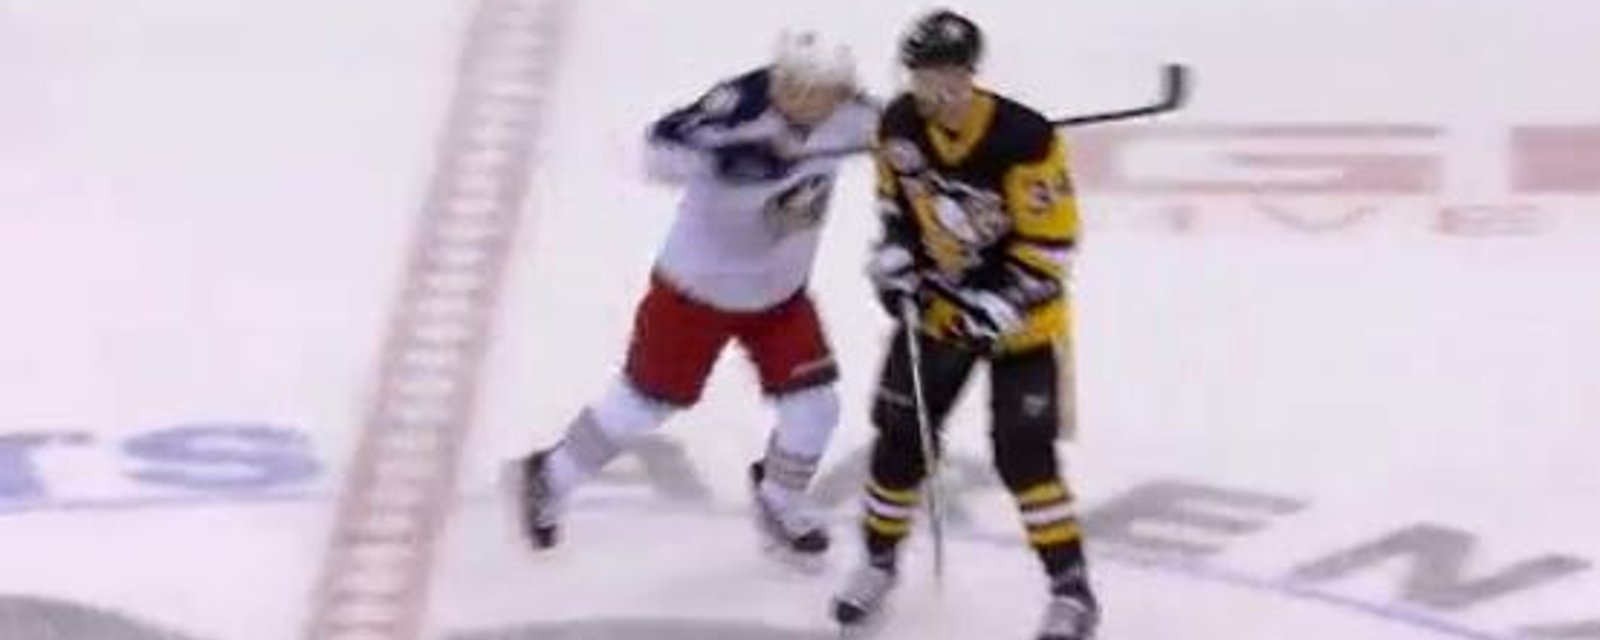 Calvert with the disgusting cross-checking sequence. 